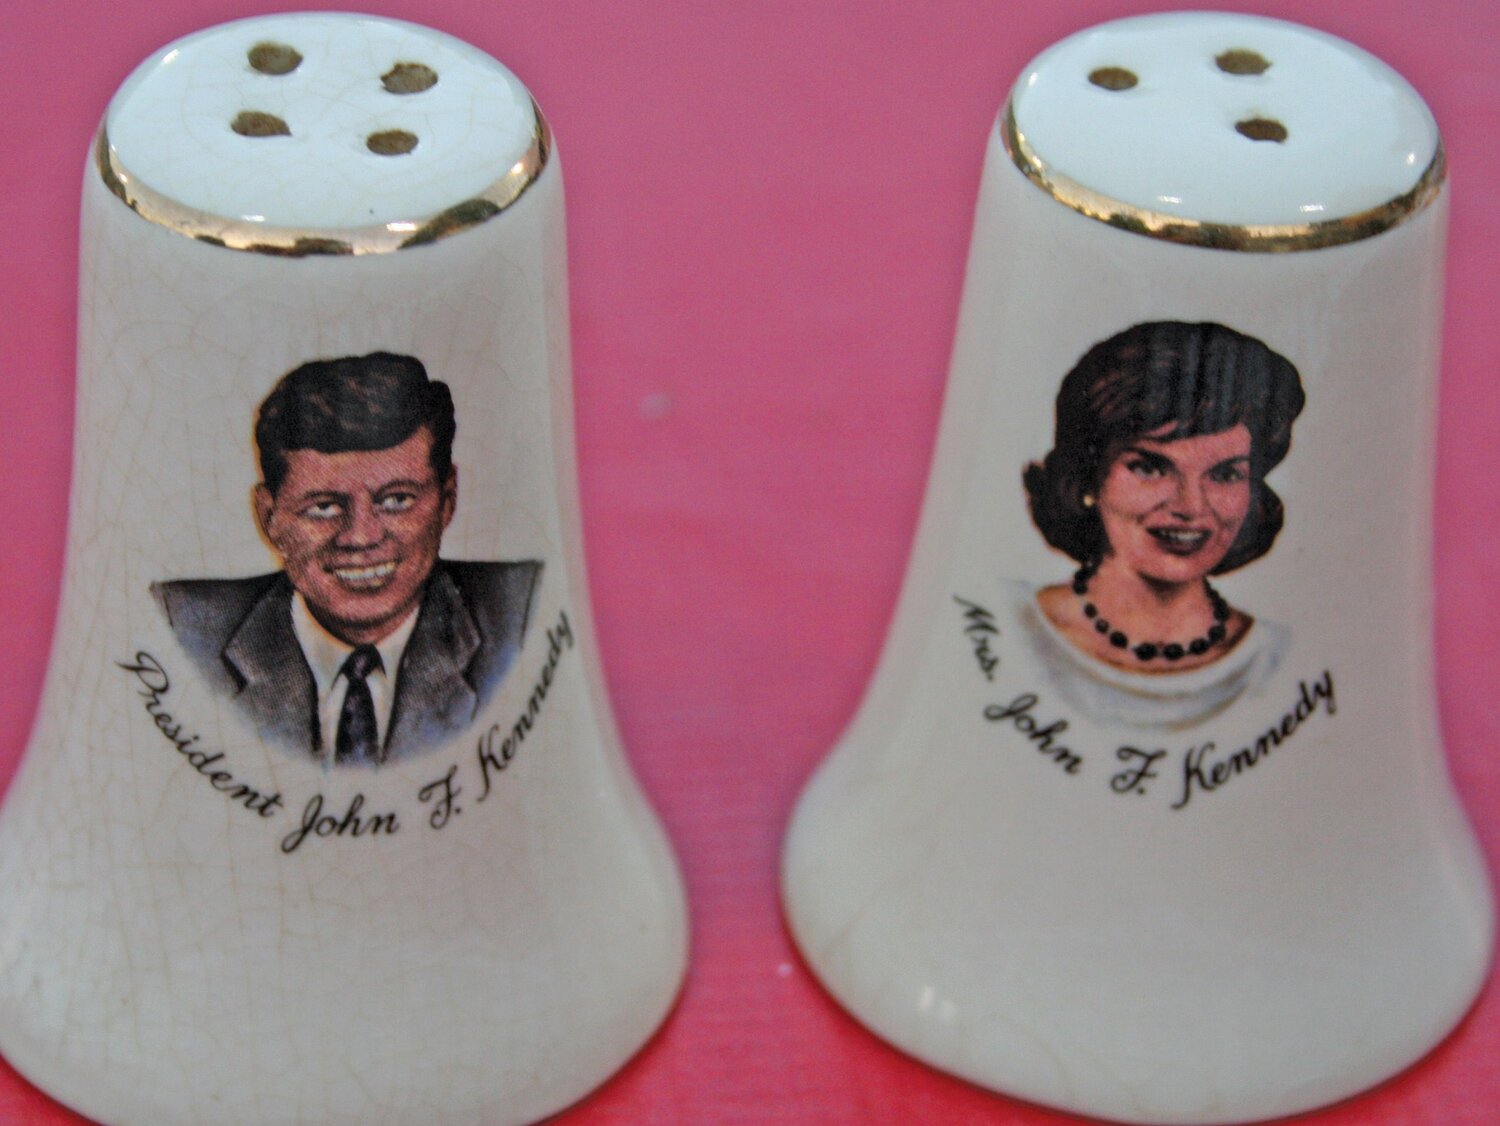 Jack and Jackie salt and pepper shakers are among the Kennedy collectibles that are in demand today.